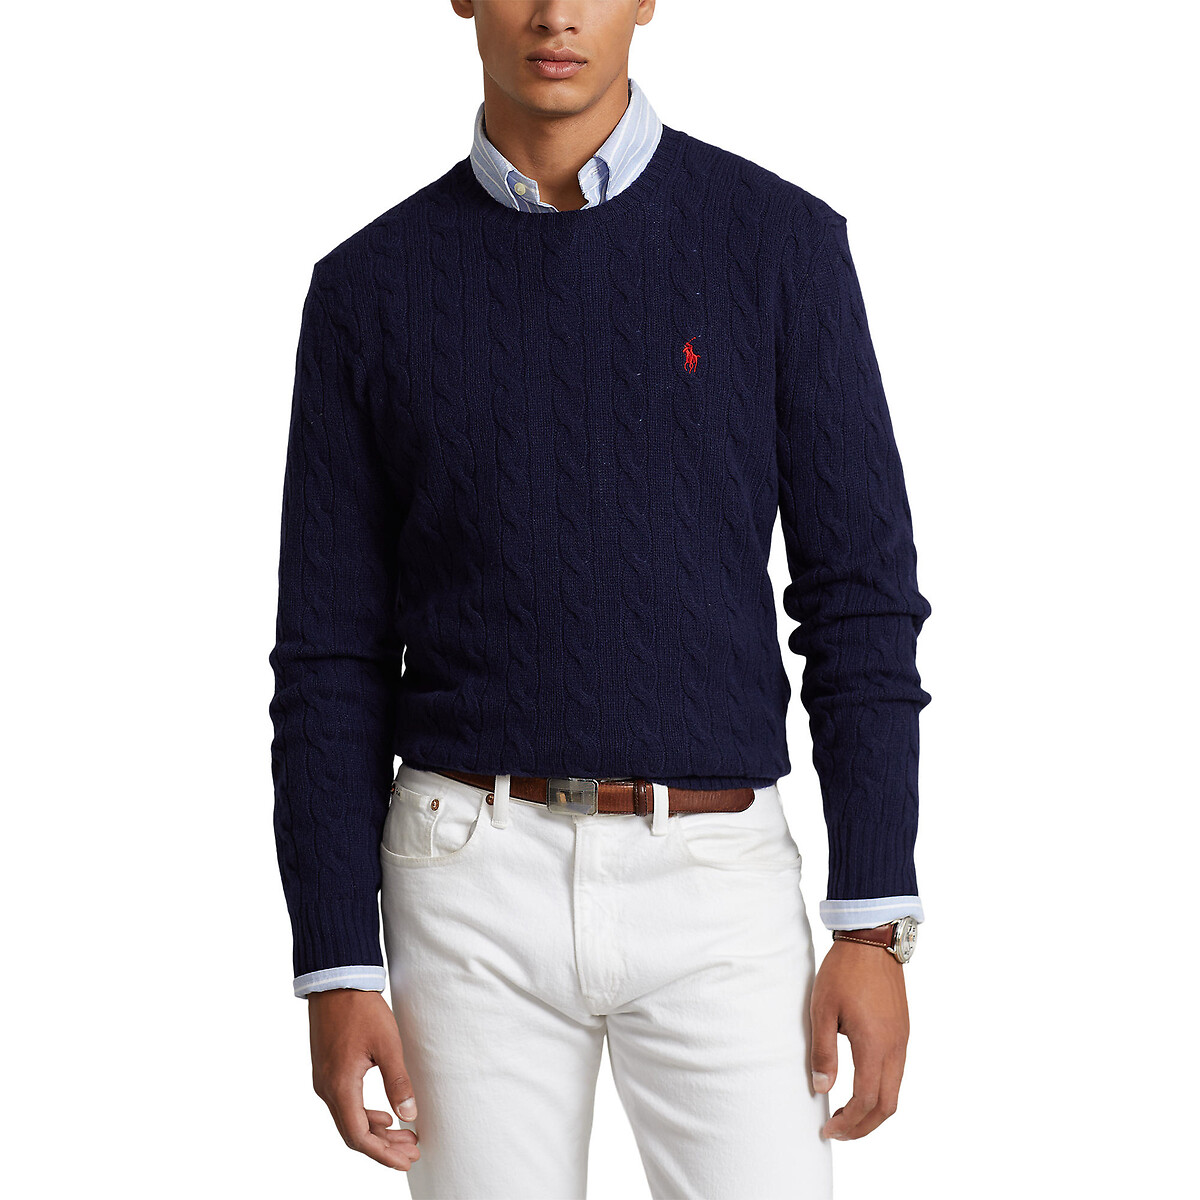 Image of Wool/Cashmere Jumper in Cable Knit with Crew Neck